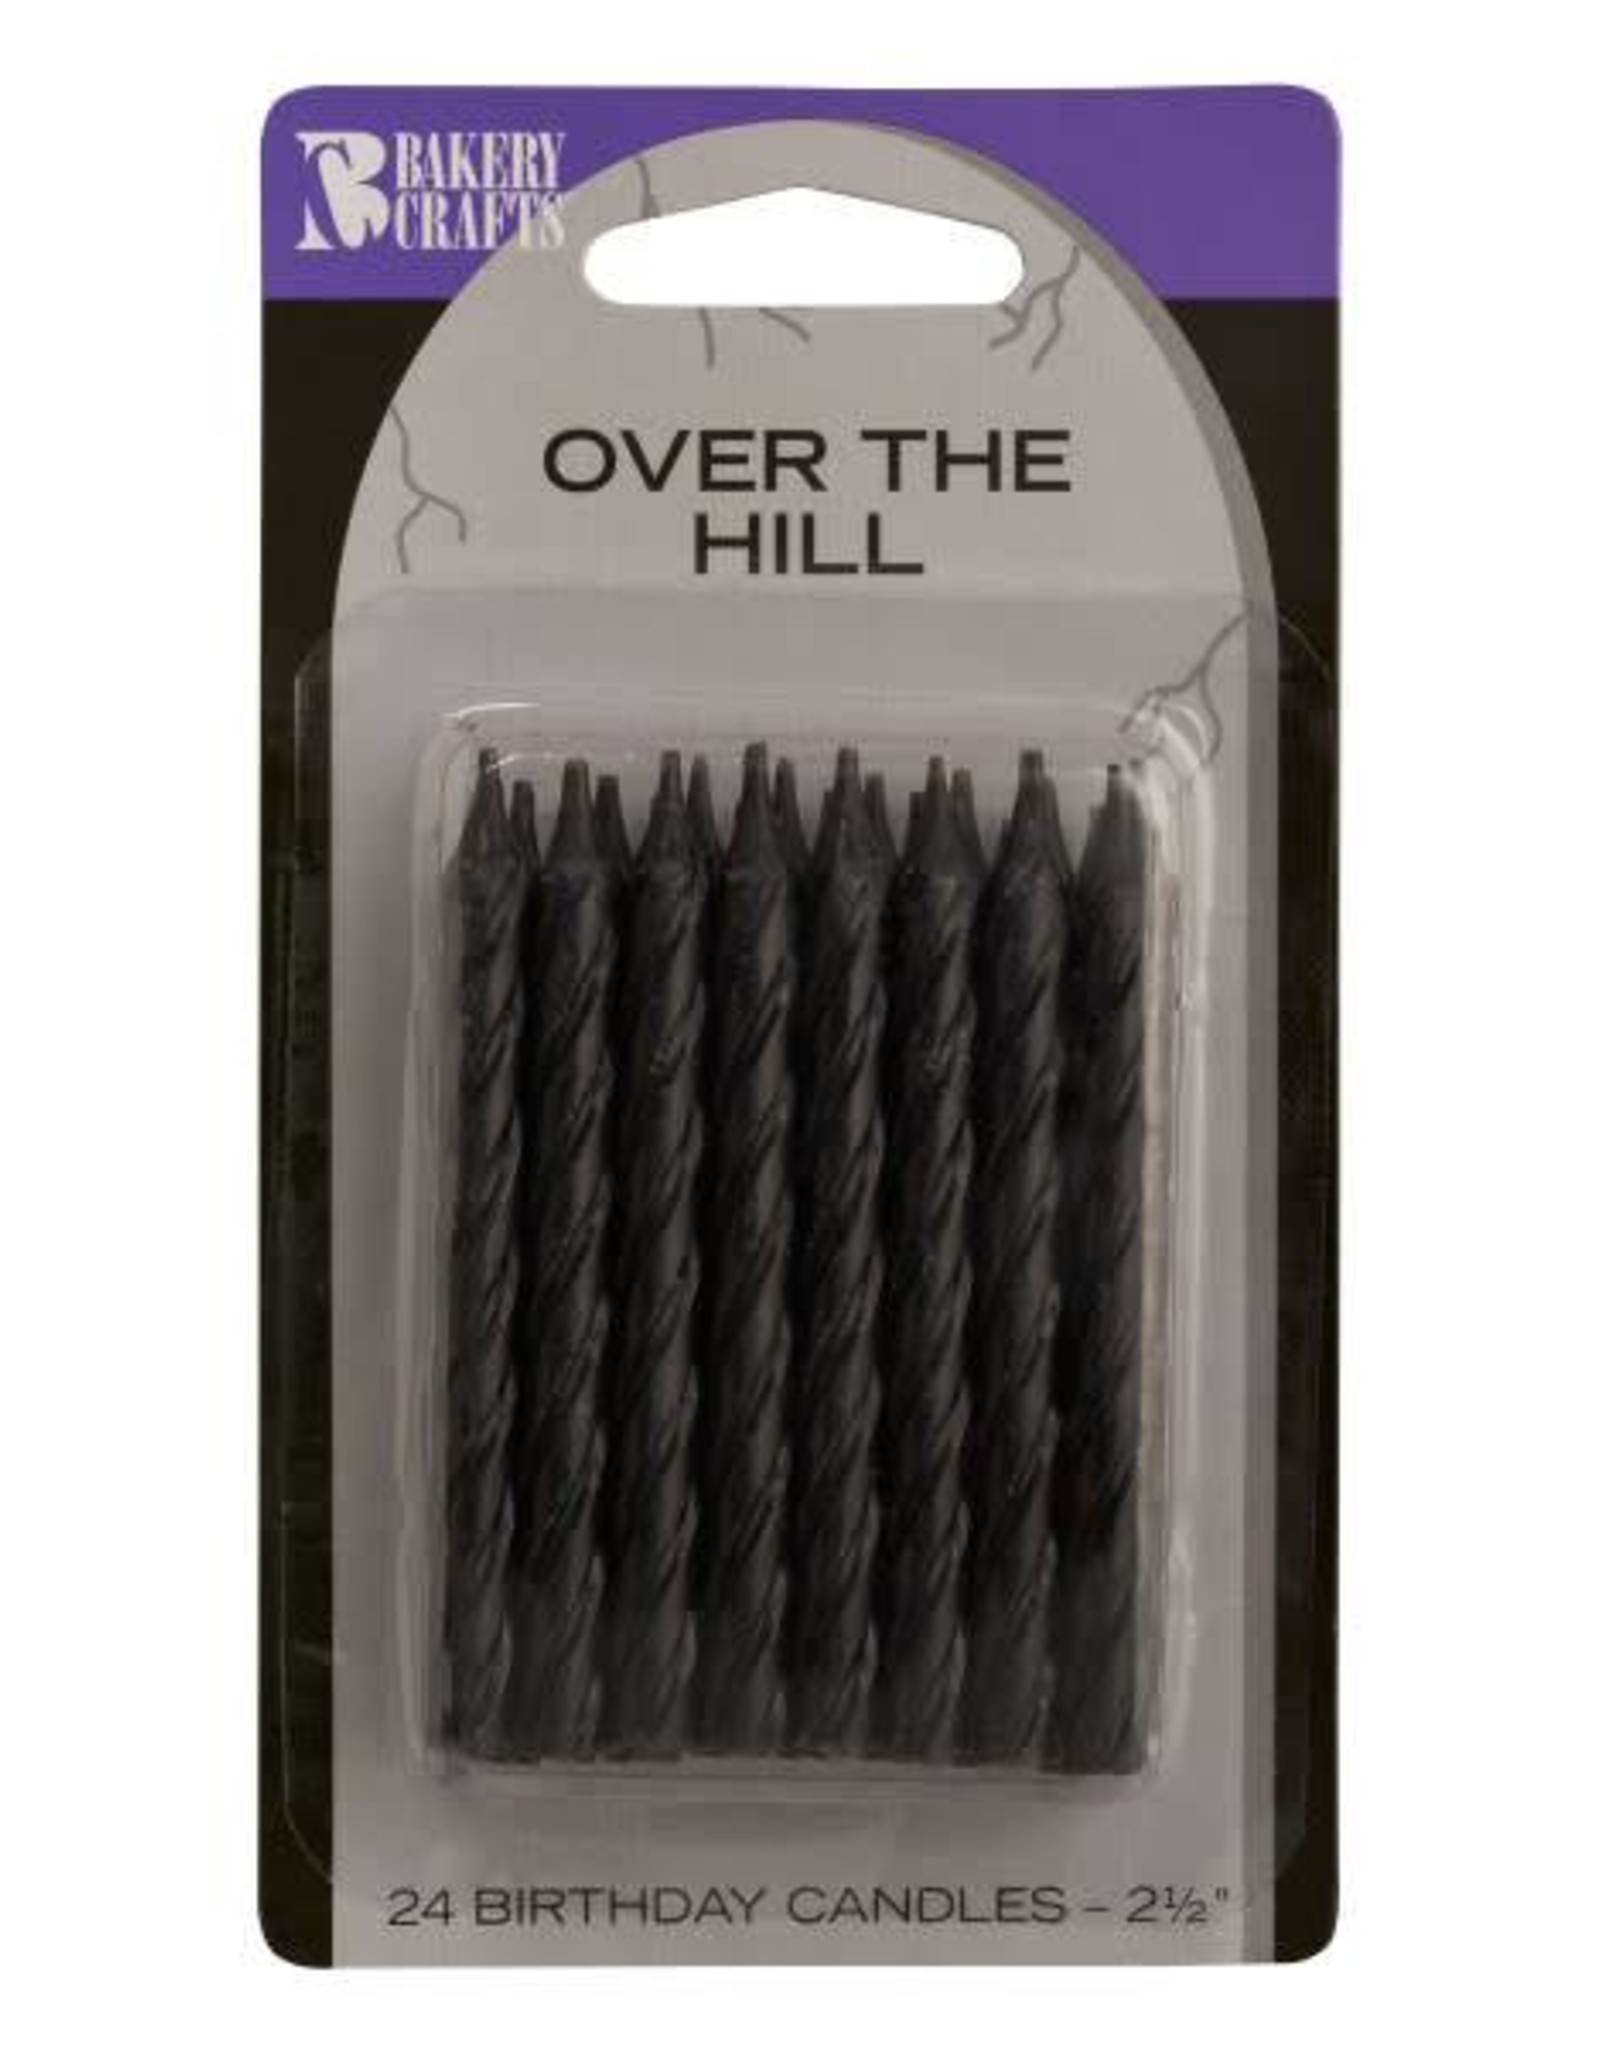 Over the Hill Candles (Black)